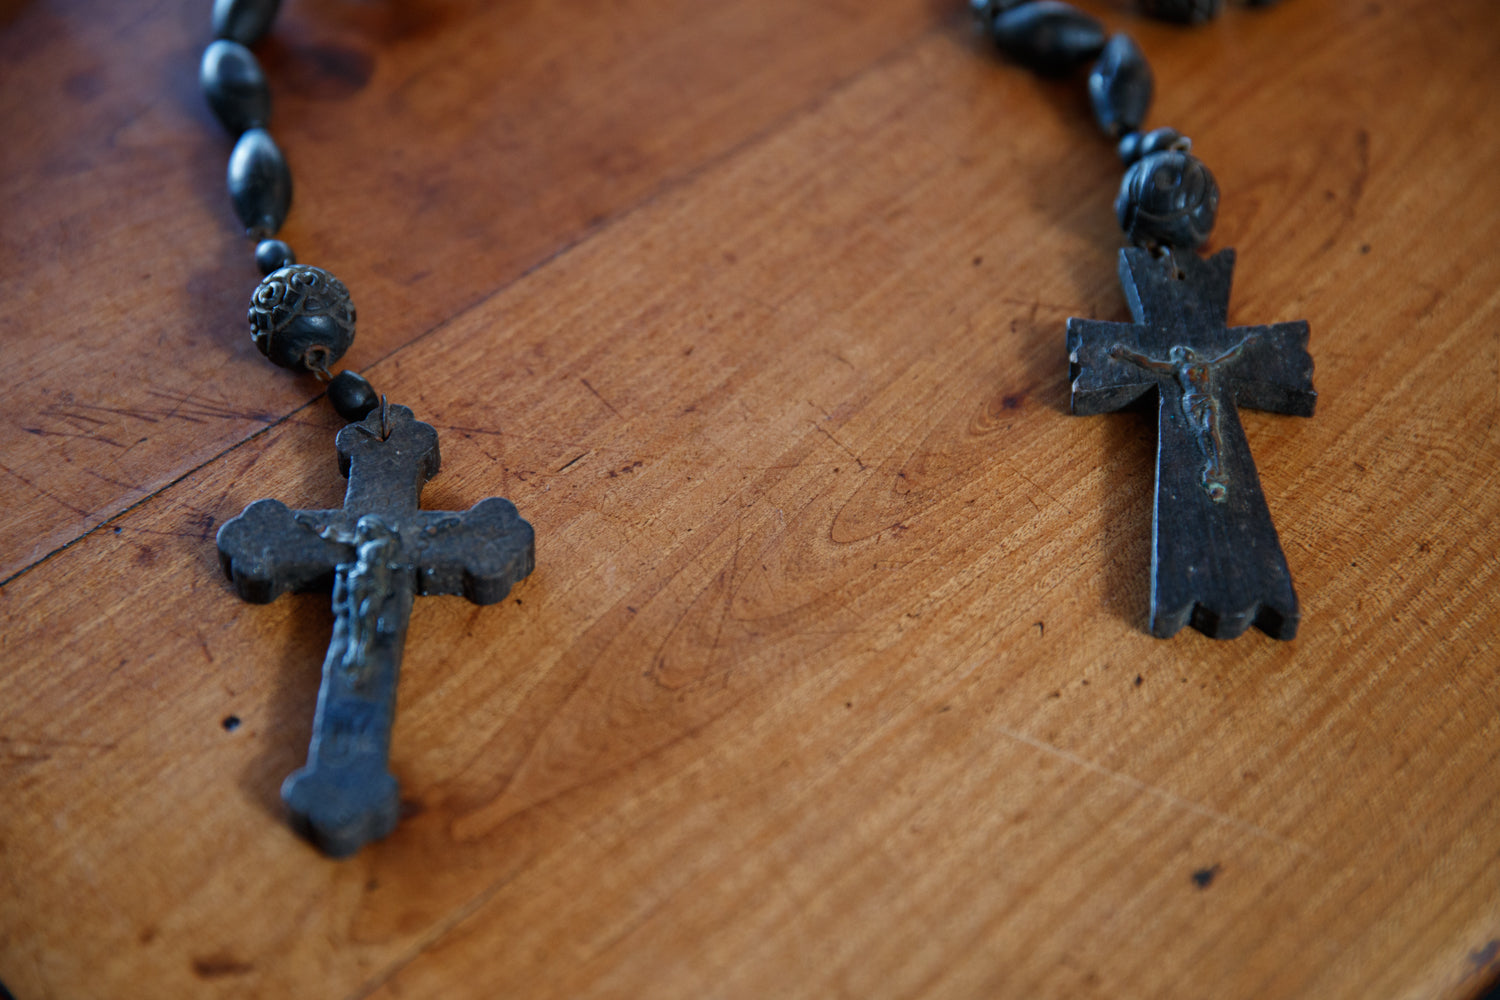 Large Wooden French Rosaries